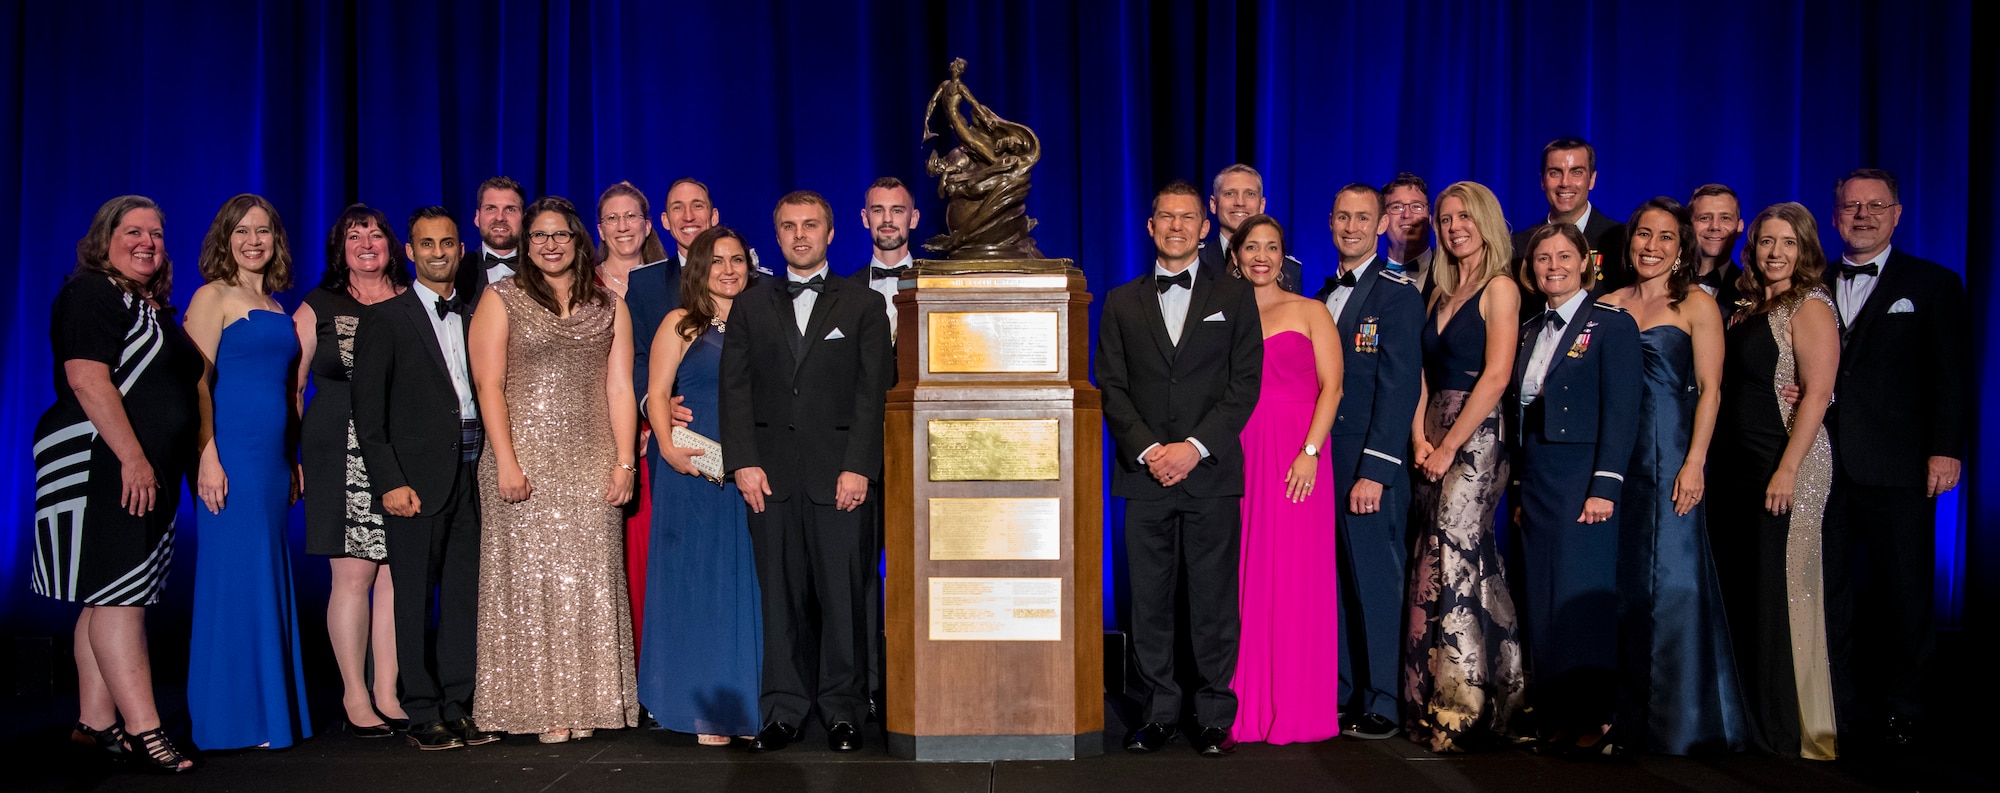 Team Edwards poses for a picture next the Collier Trophy after the 2018 Robert J. Collier Trophy presentation ceremony, Washington, June 13, 2019. The Collier Trophy is awarded annually by the U.S. Aeronautic Association "for the greatest achievement in aeronautics or astronautics in America, with respect to improving the performance, efficiency, and safety of air or space vehicles, the value of which has been thoroughly demonstrated by actual use during the preceding year."(U.S. Air Force photo by Christopher Dyer)